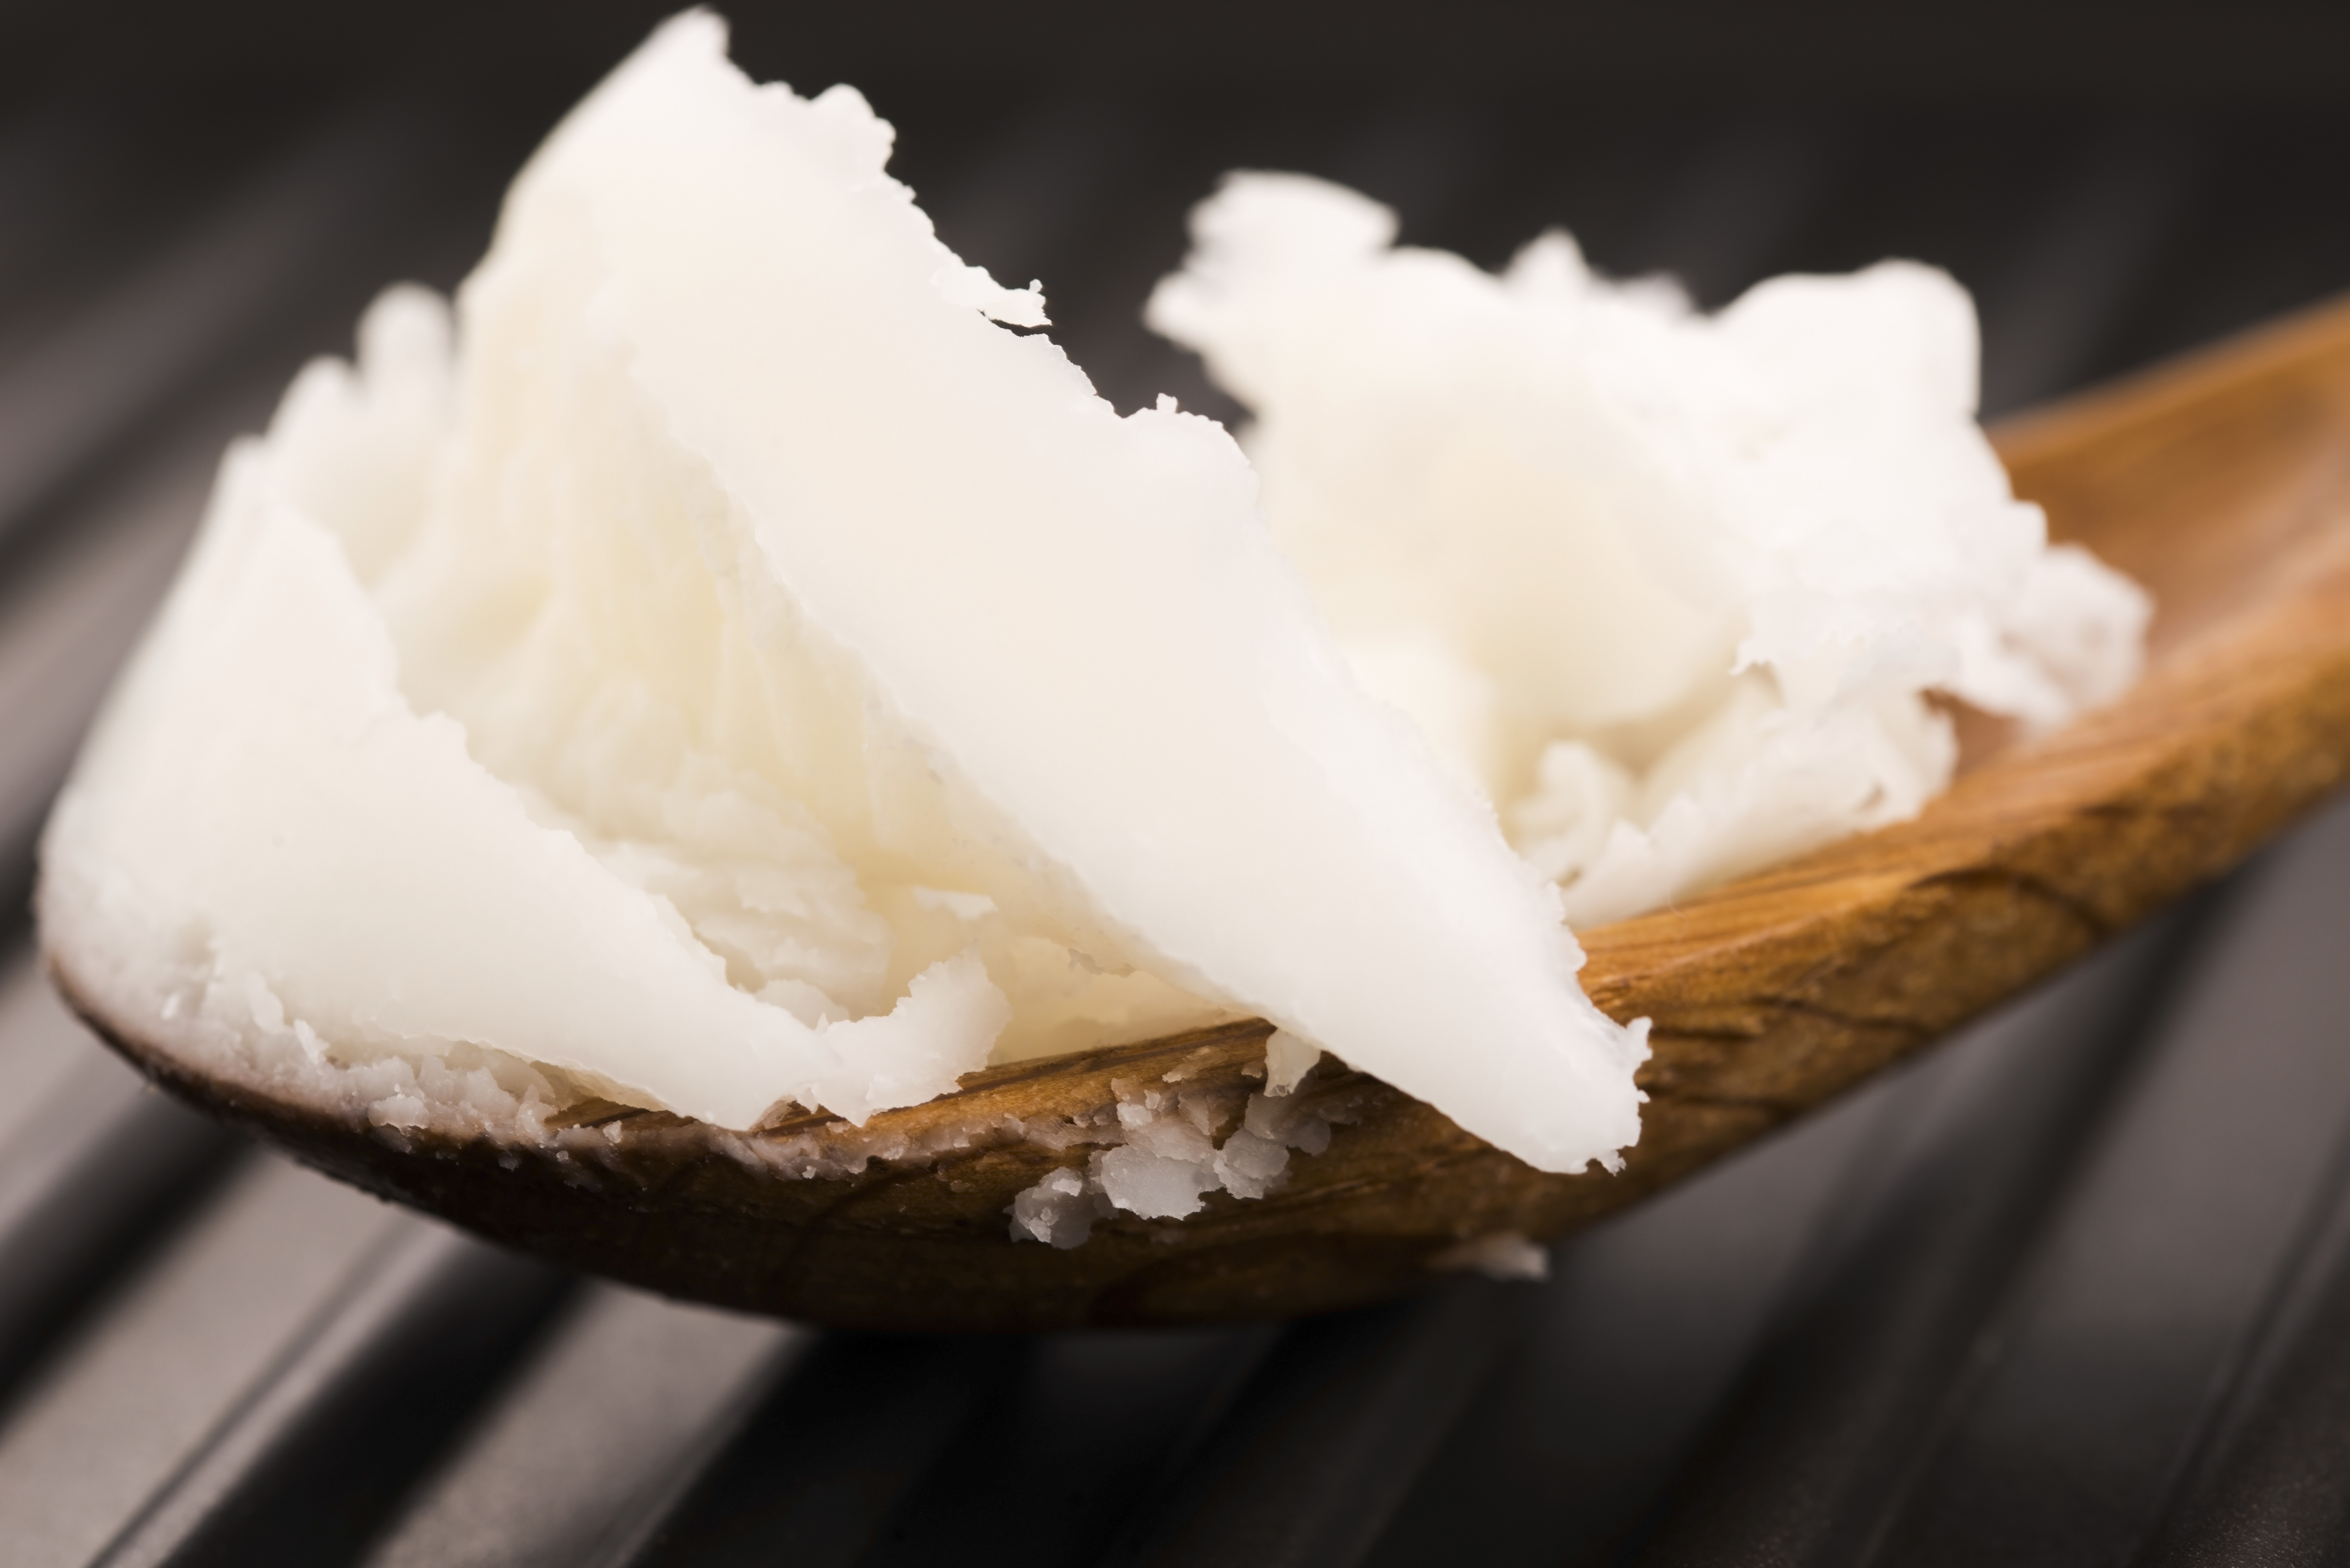 7 Shocking Health Benefits Found In Just One Teaspoonful Of Coconut Oil (Can You Beat Heart Disease, Low Energy – And Everything In Between?)